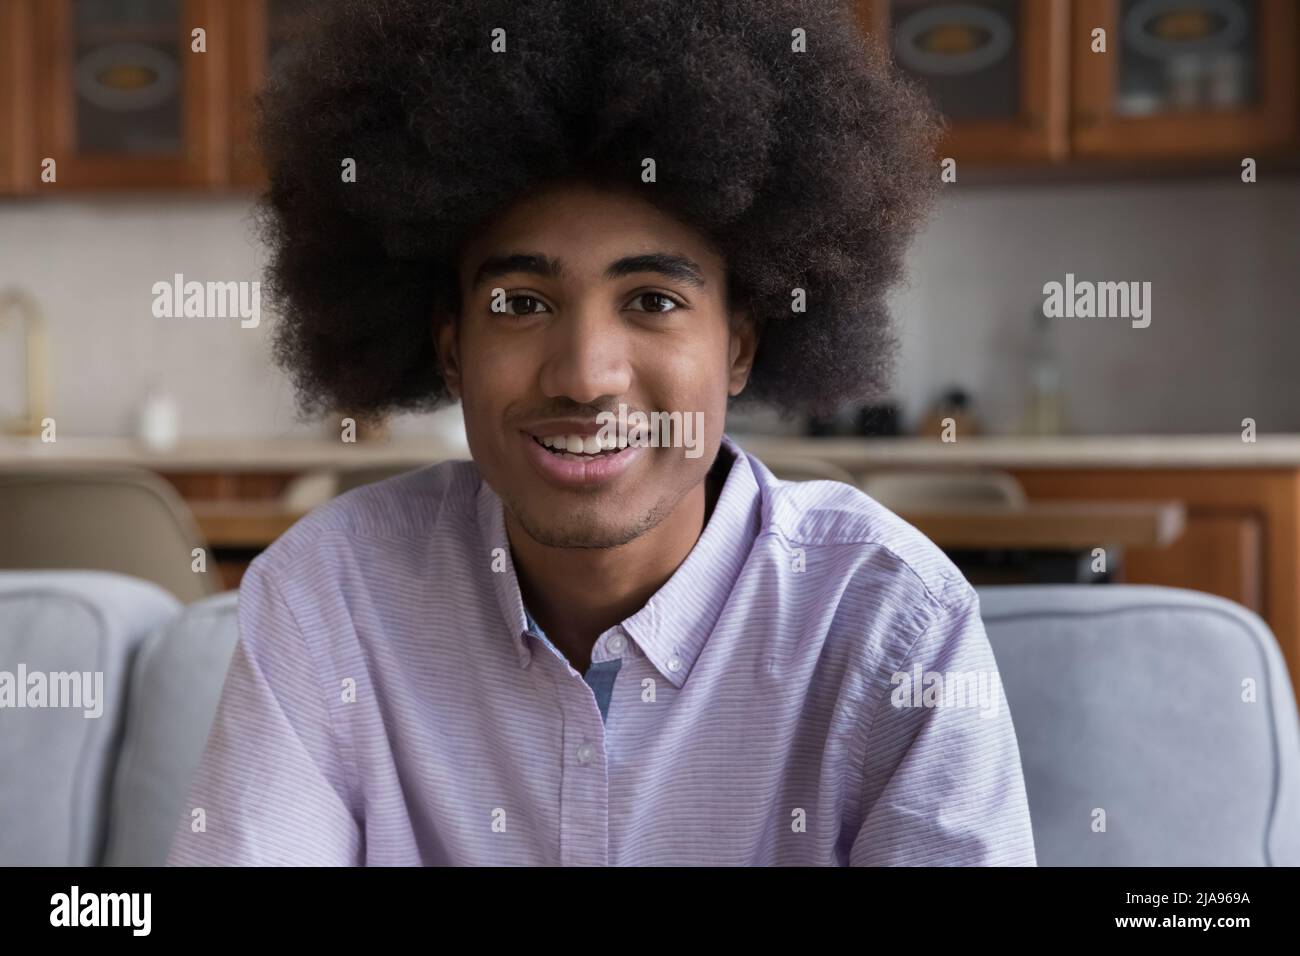 Handsome African American blogger guy with natural curly fuzzy hair Stock Photo